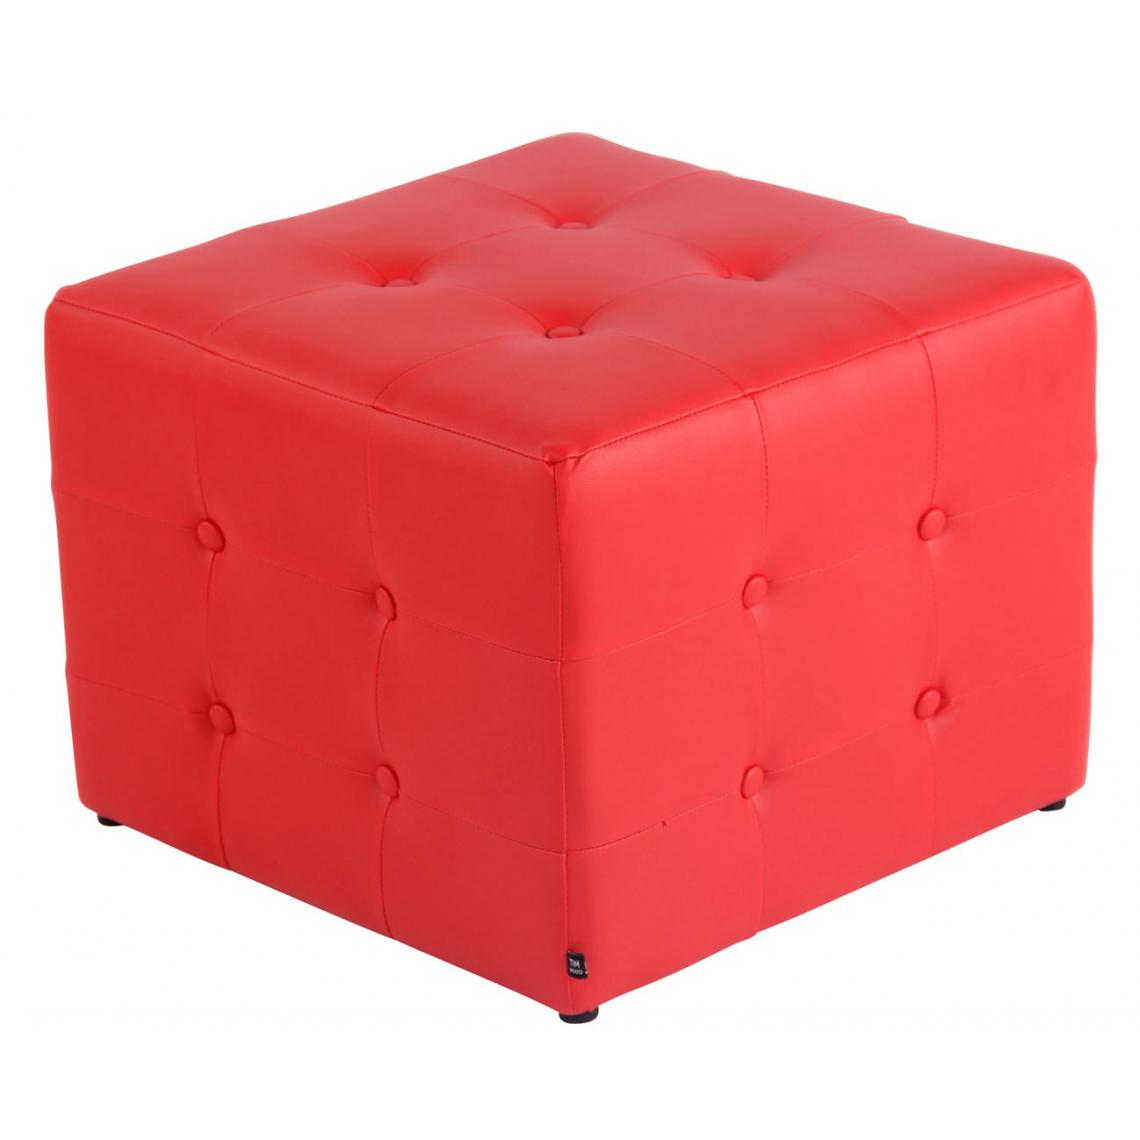 Icaverne - Superbe Pouf categorie Islamabad couleur rouge - Chaises